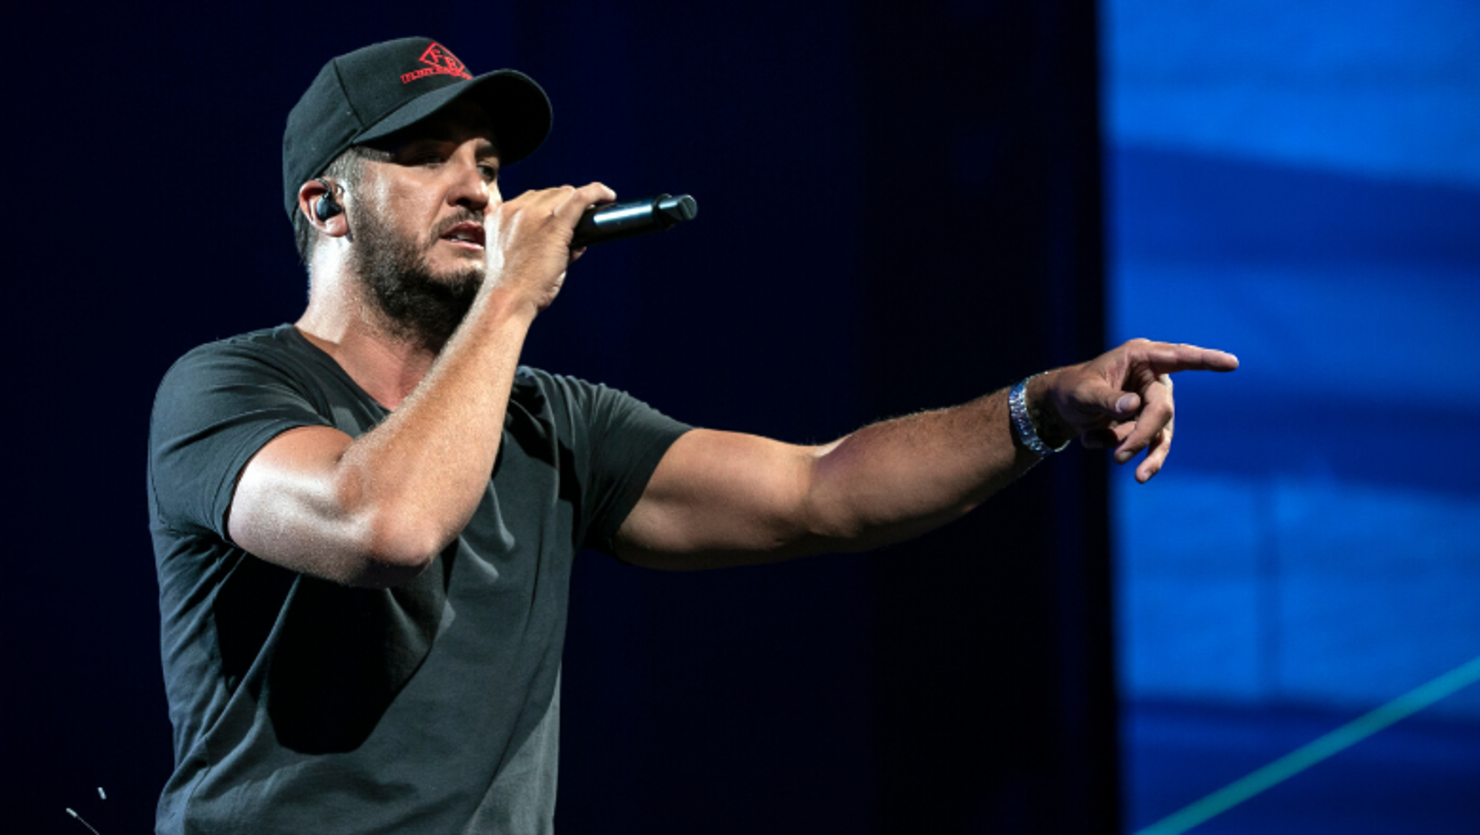 Officials Investigating After Luke Bryan's Red Stag Deer Killed At His Farm